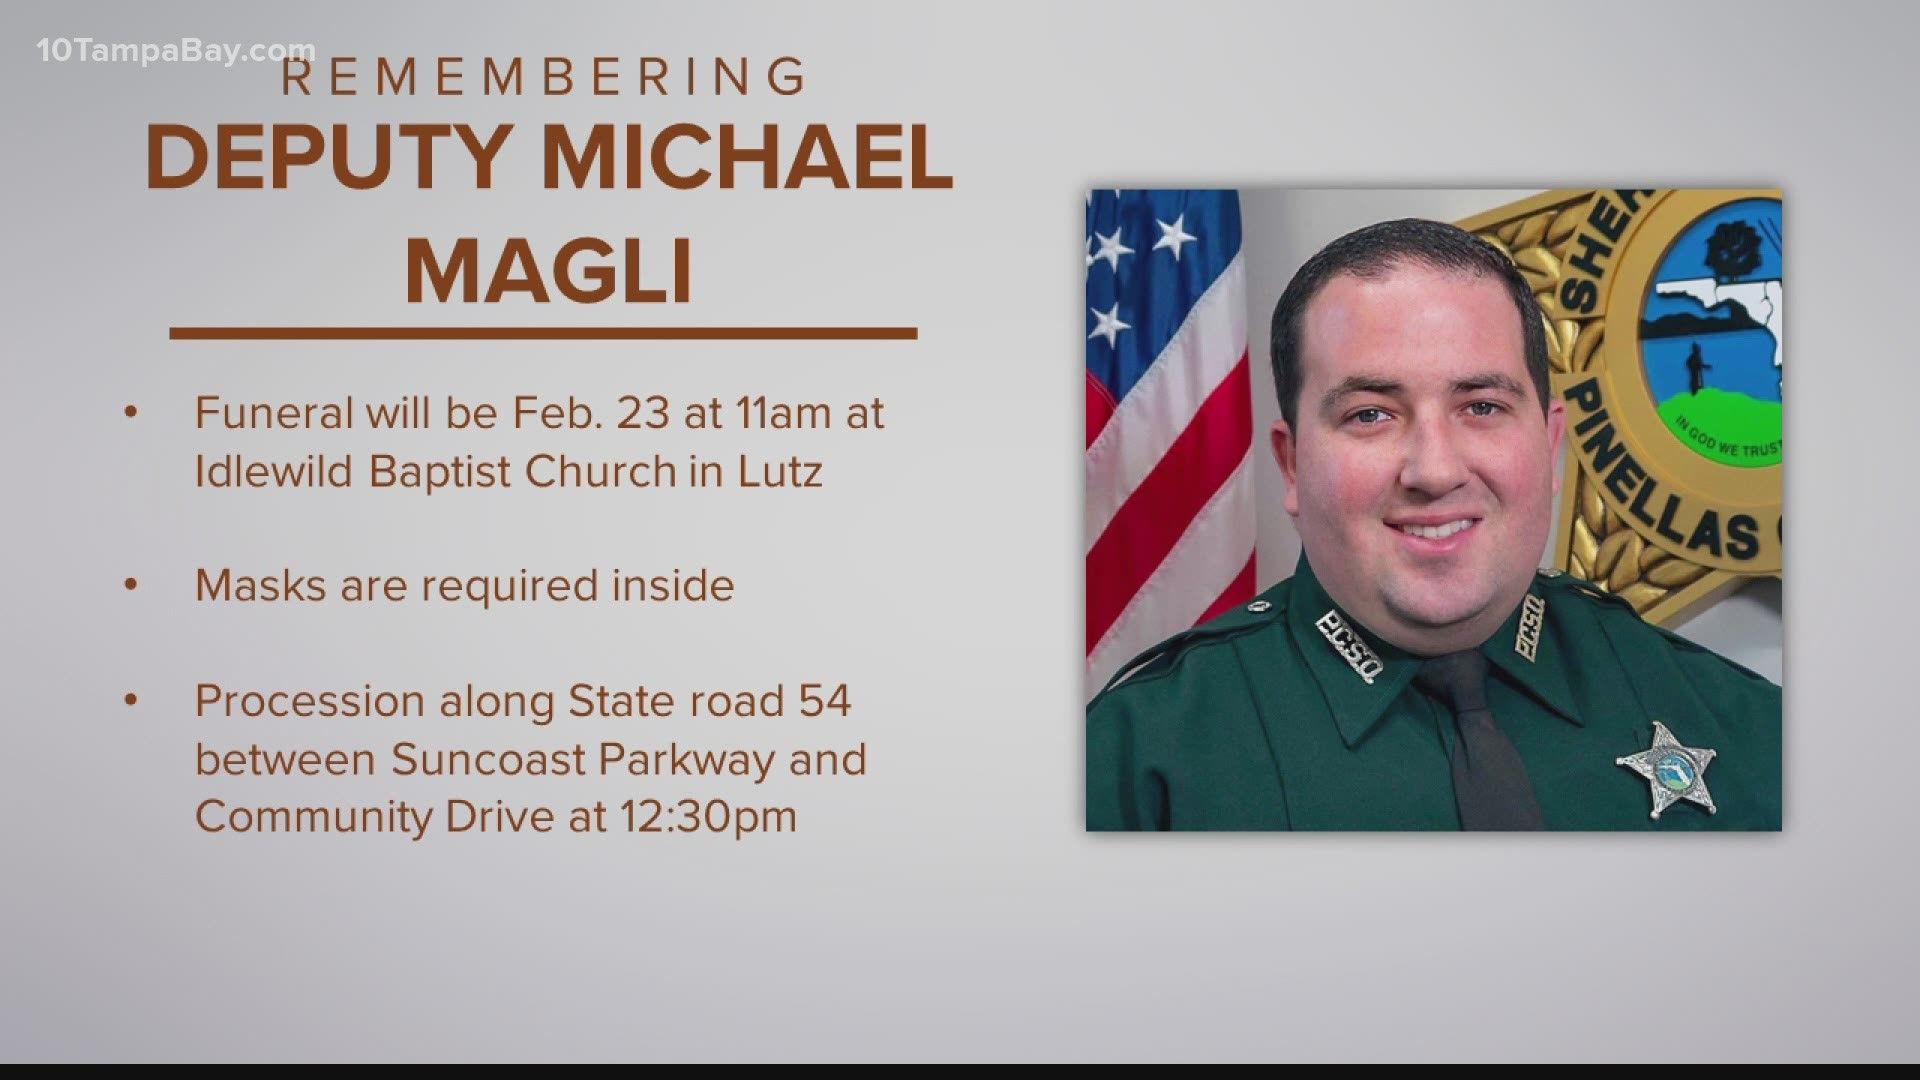 Magli is the first Pinellas deputy killed in the line of duty since the agency was established in 1912.